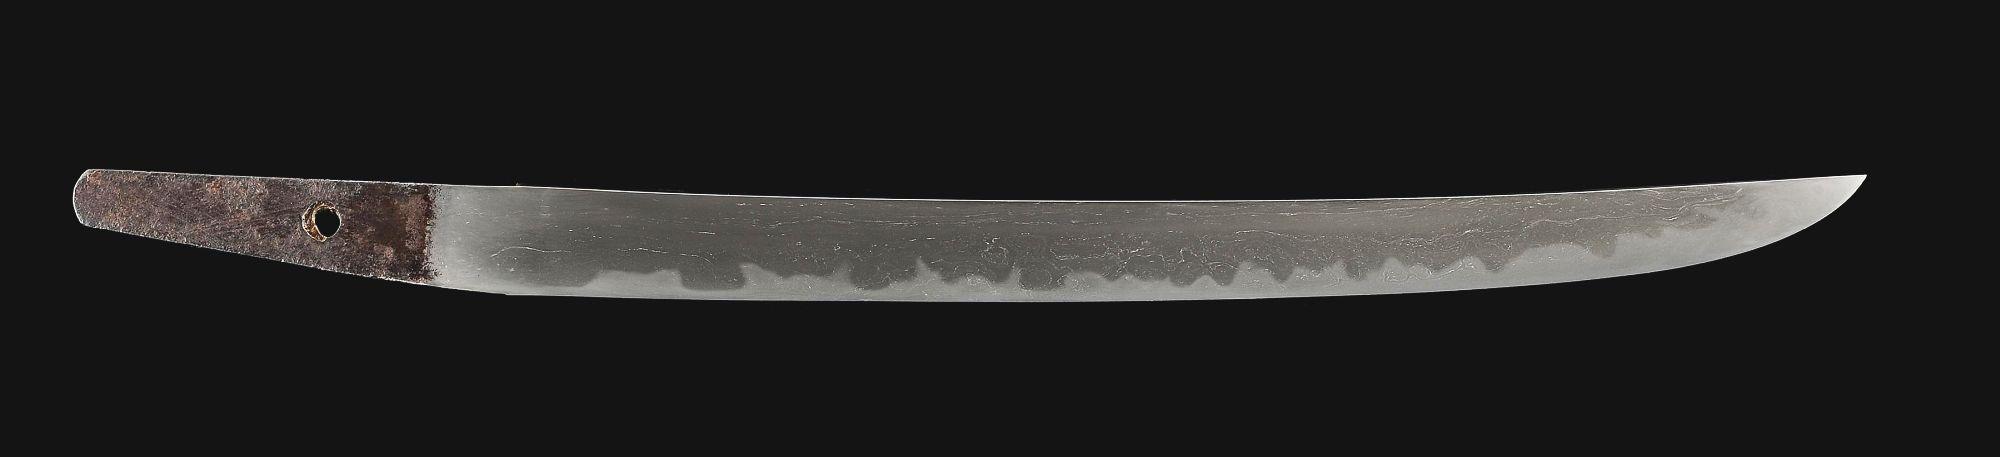 TANTO BY KANEIWA WITH NBTHK HOZON PAPERS FOR BLADE AND MOUNTS.